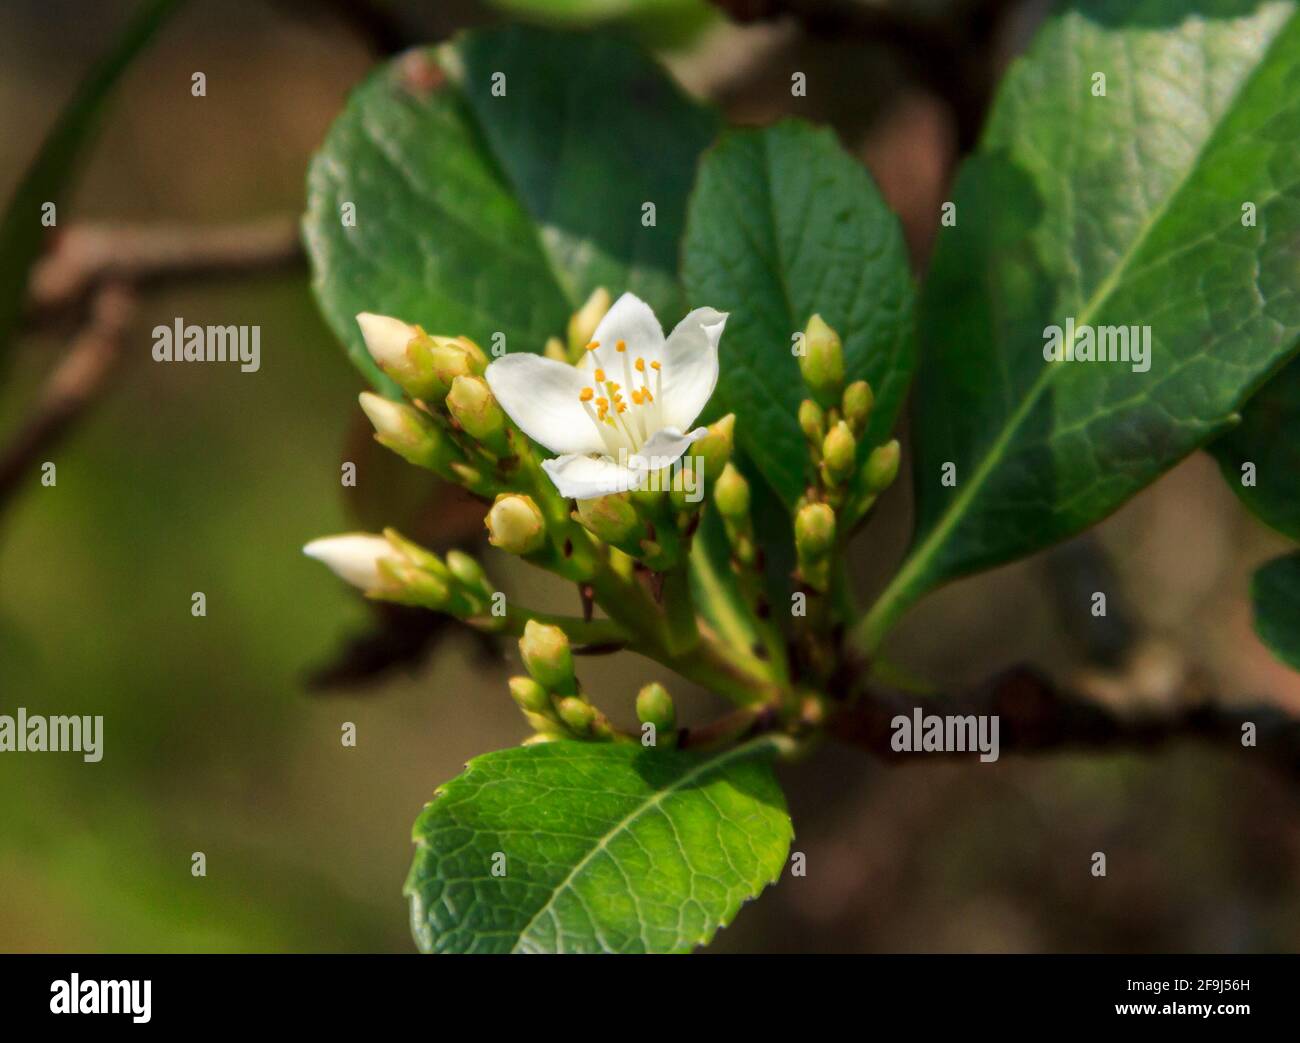 a blooming mock orange flower and some others in bud. Stock Photo